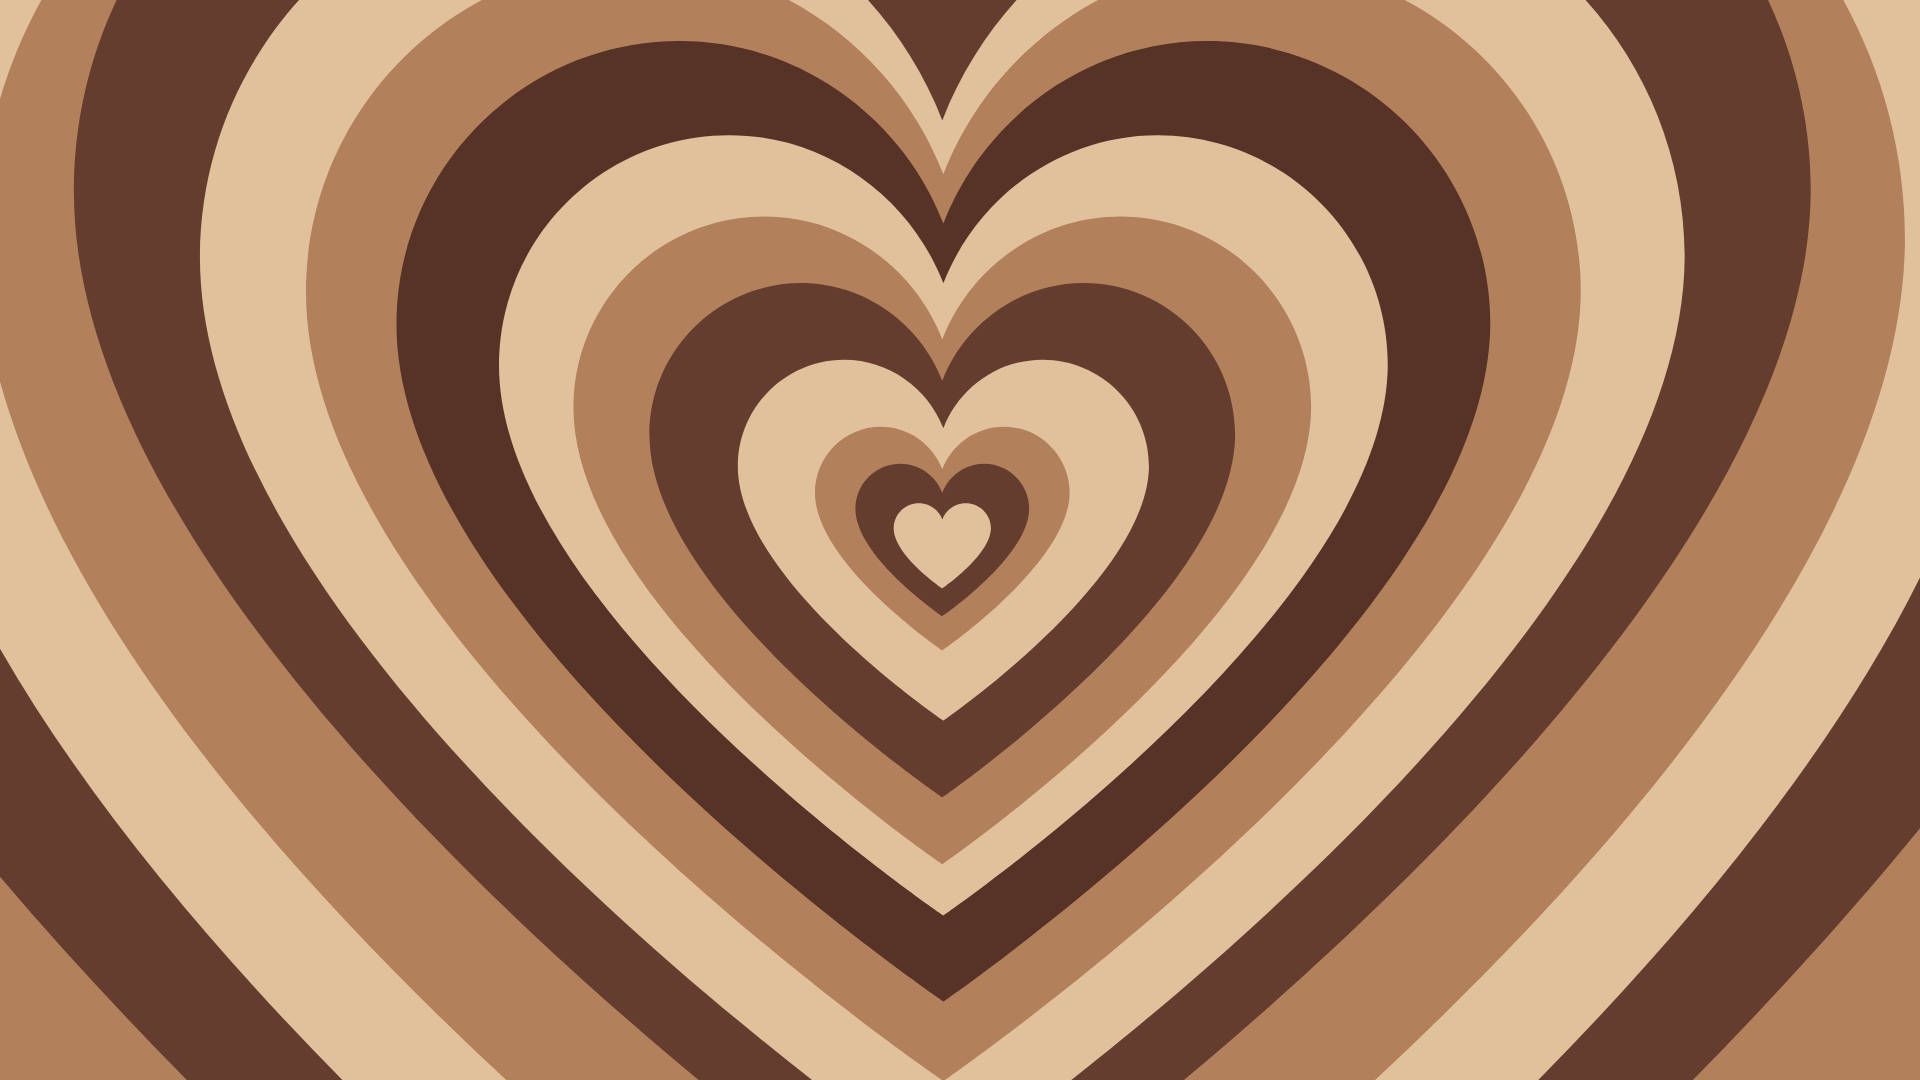 A heart shaped pattern on brown background - Heart